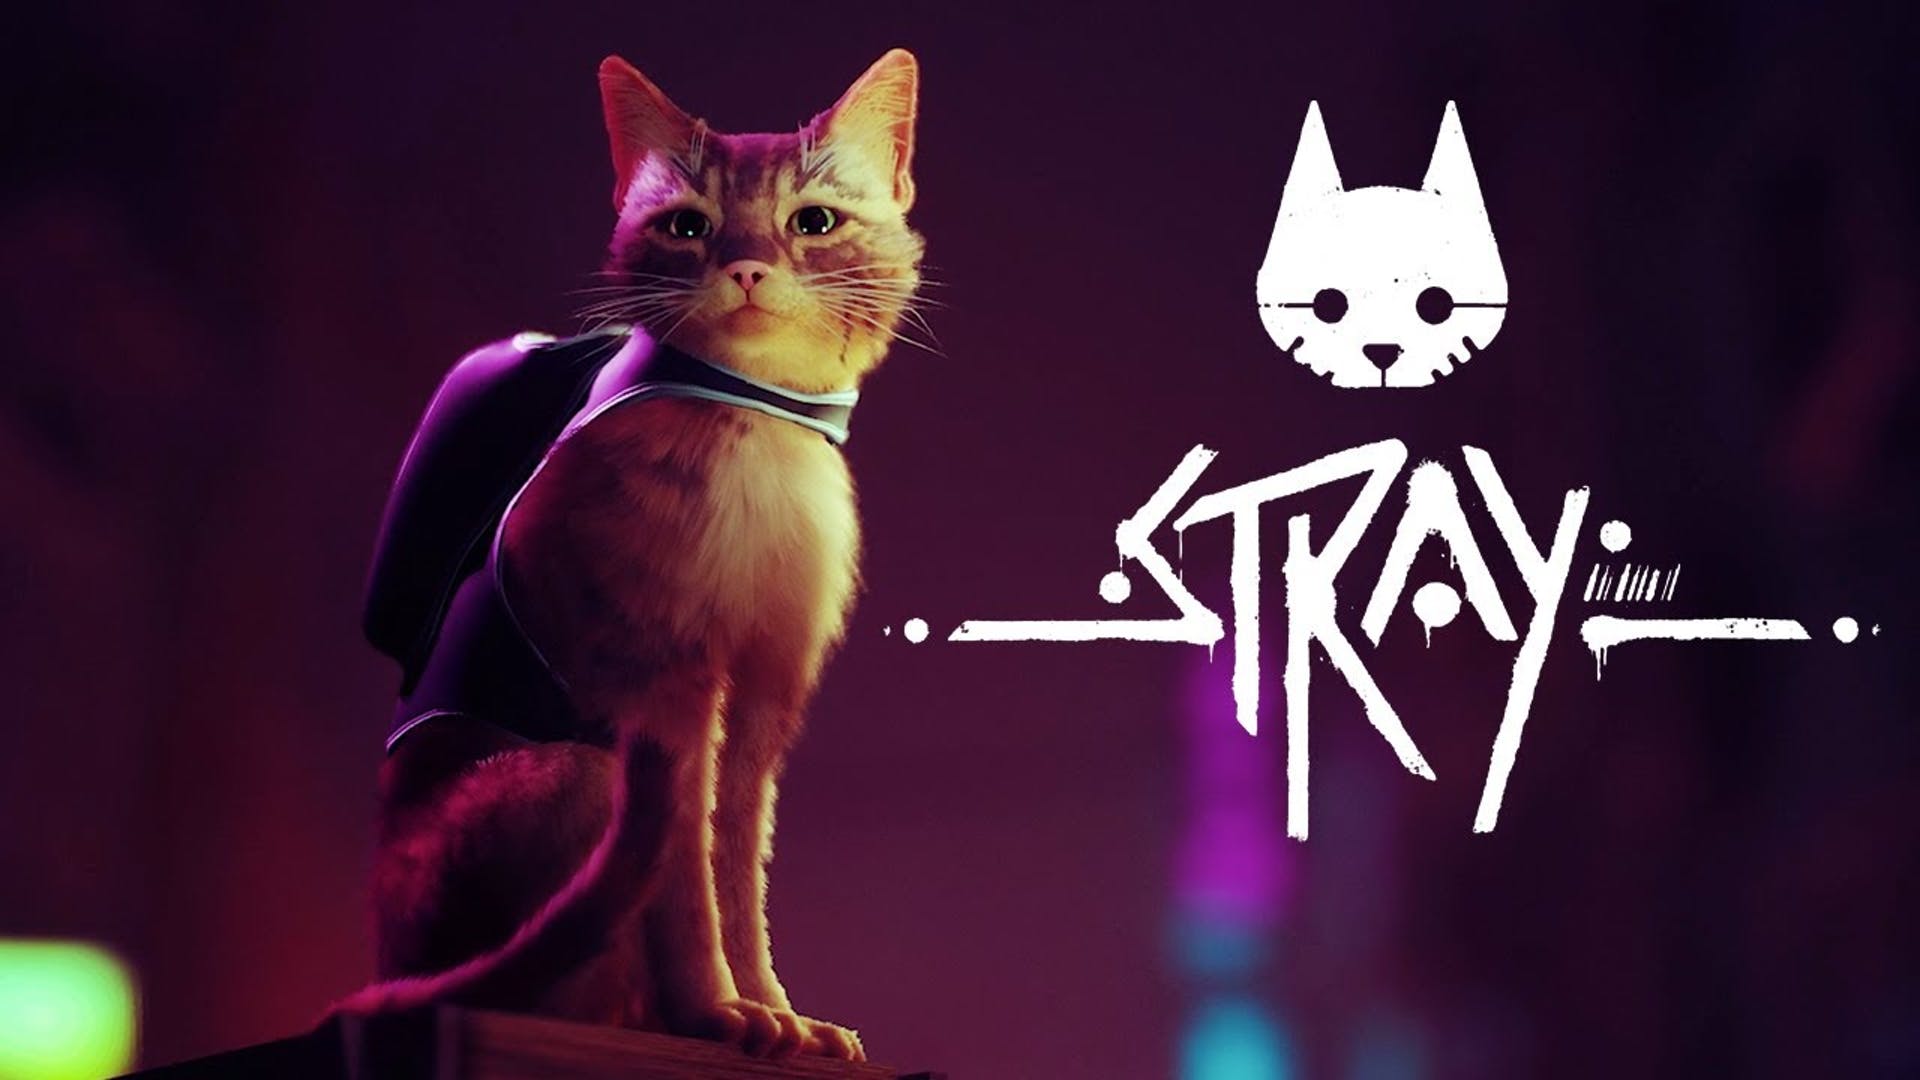 PC players are lapping up cat adventure Stray on Steam, despite